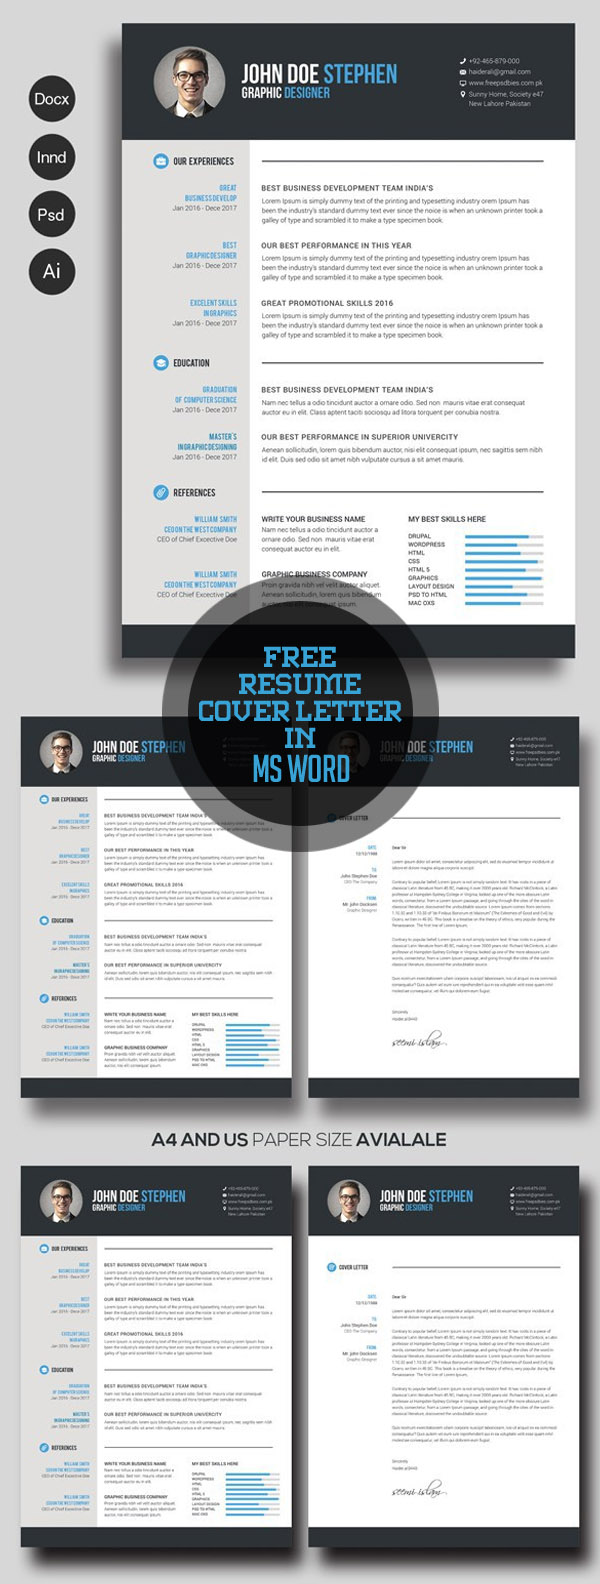 Free Resume & Cover Letter in Ms Word